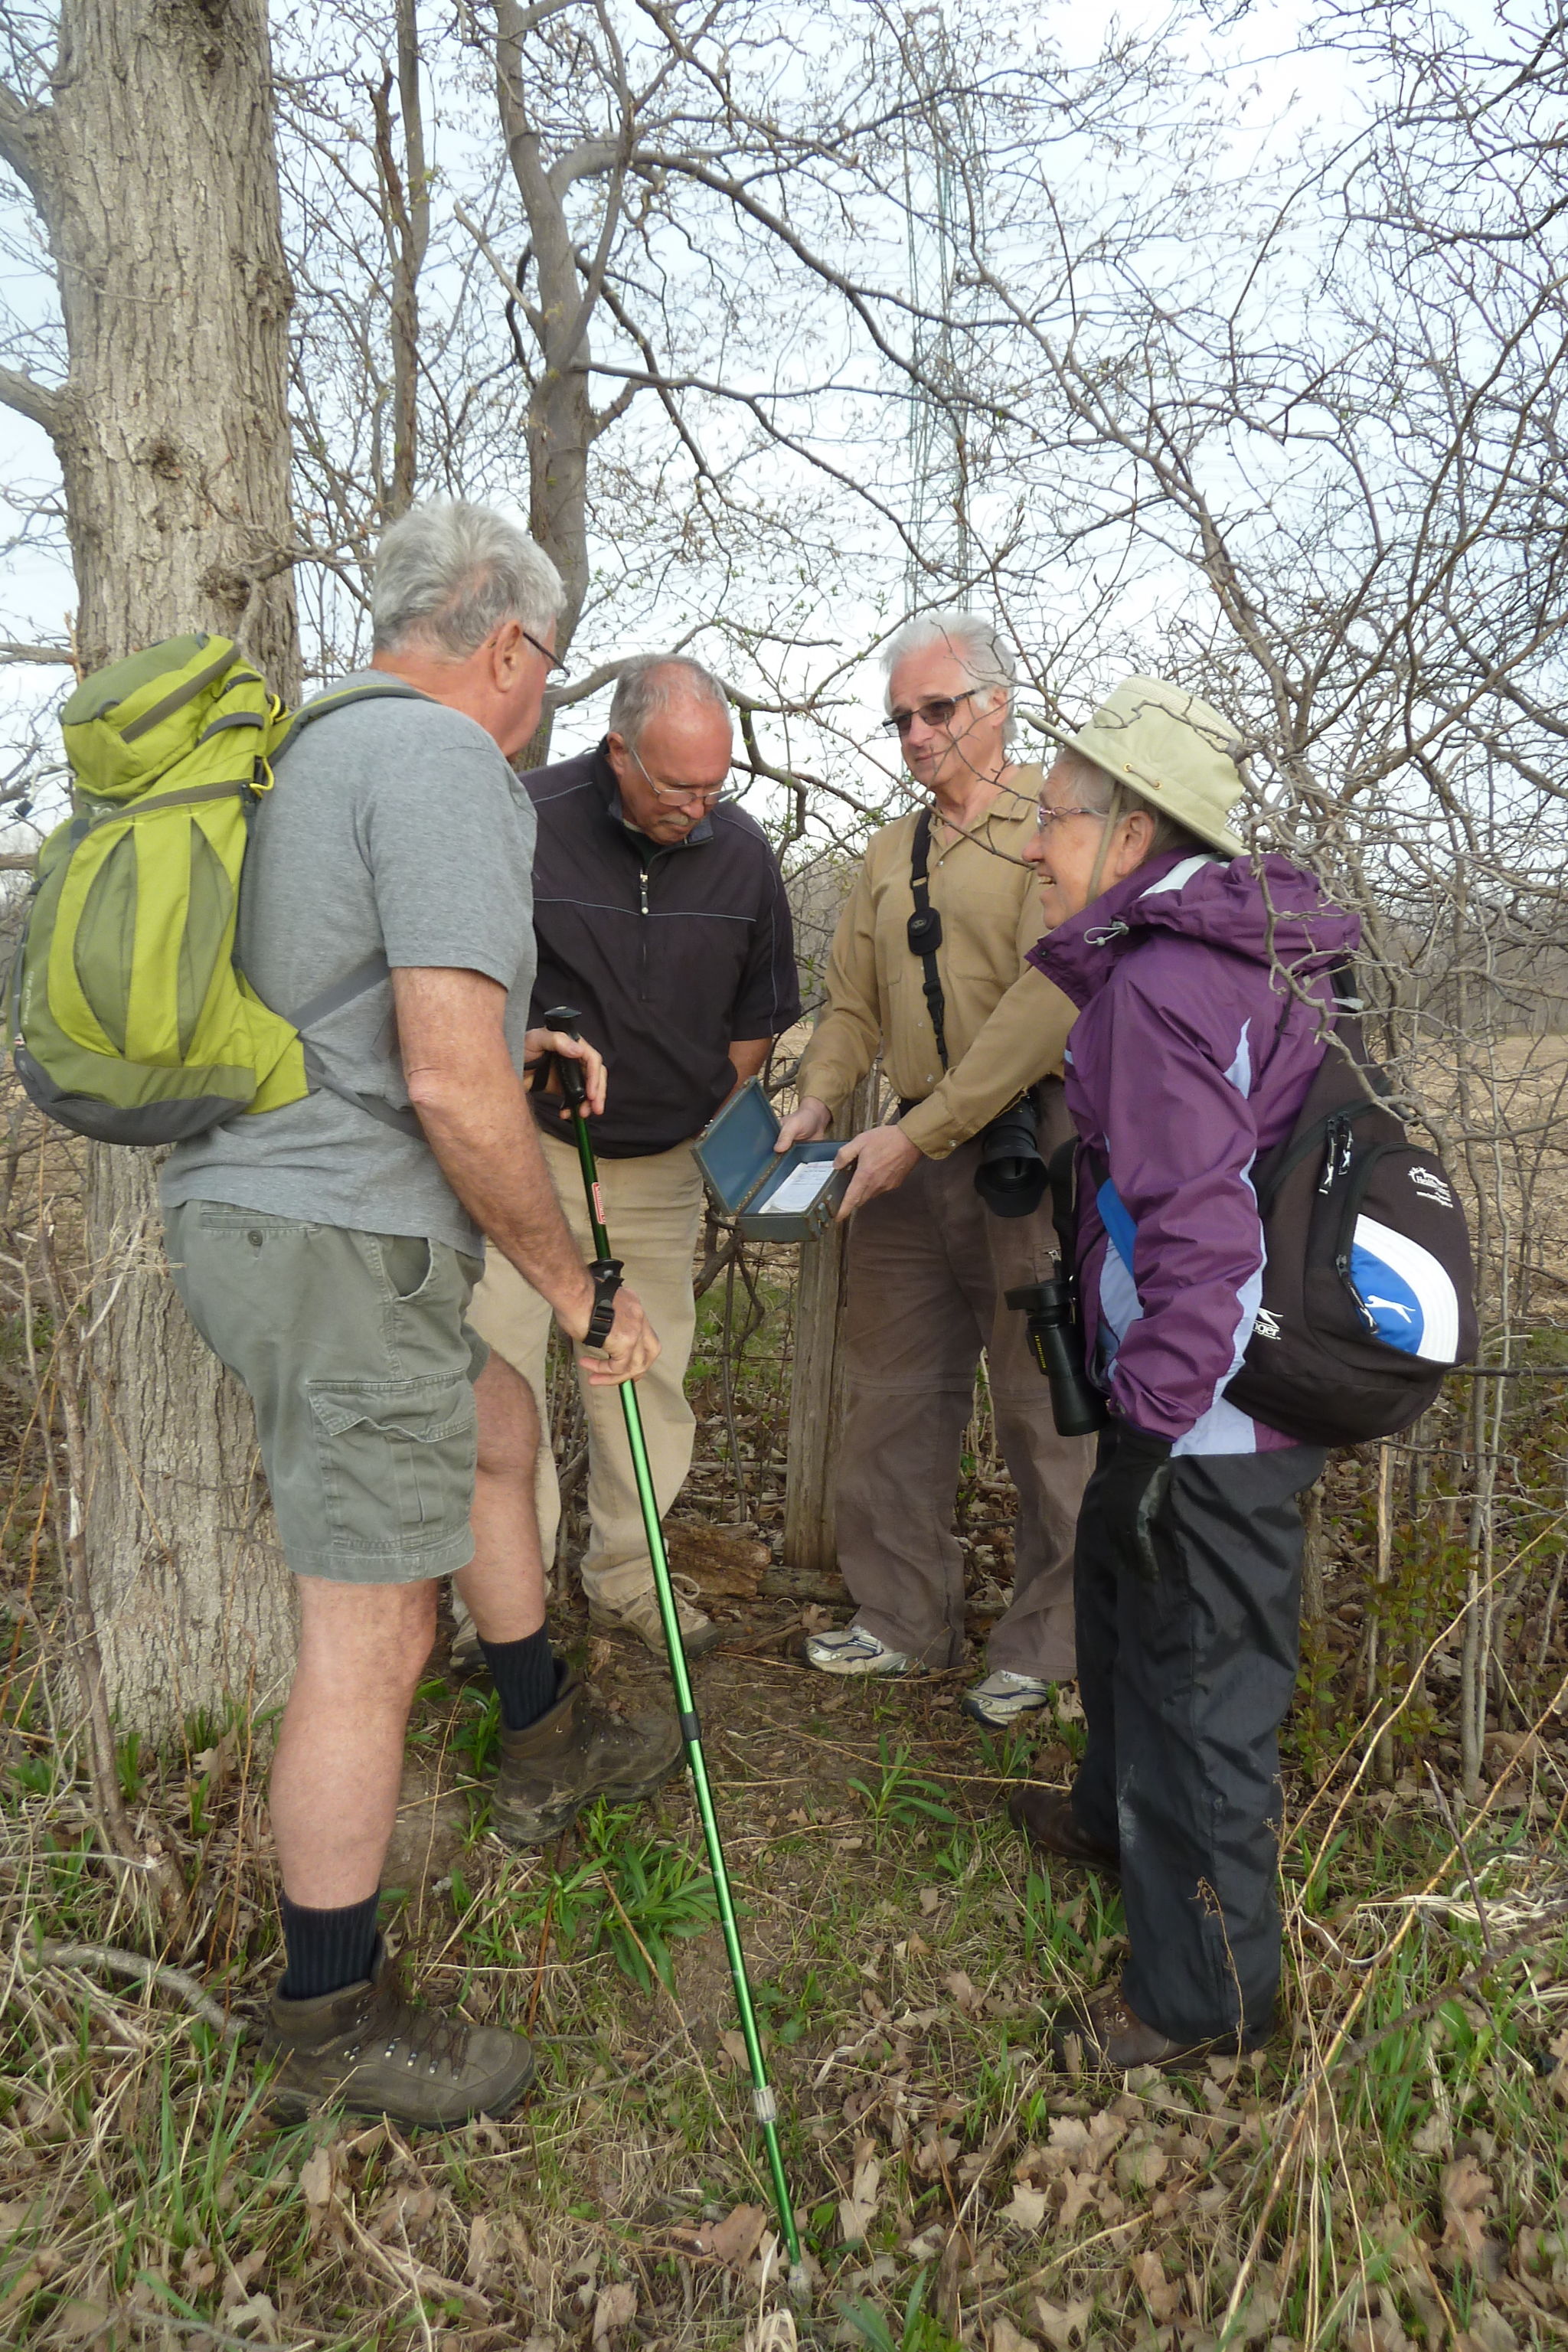 Mark showing a geocache to hikers from West Elgin Nature Club.